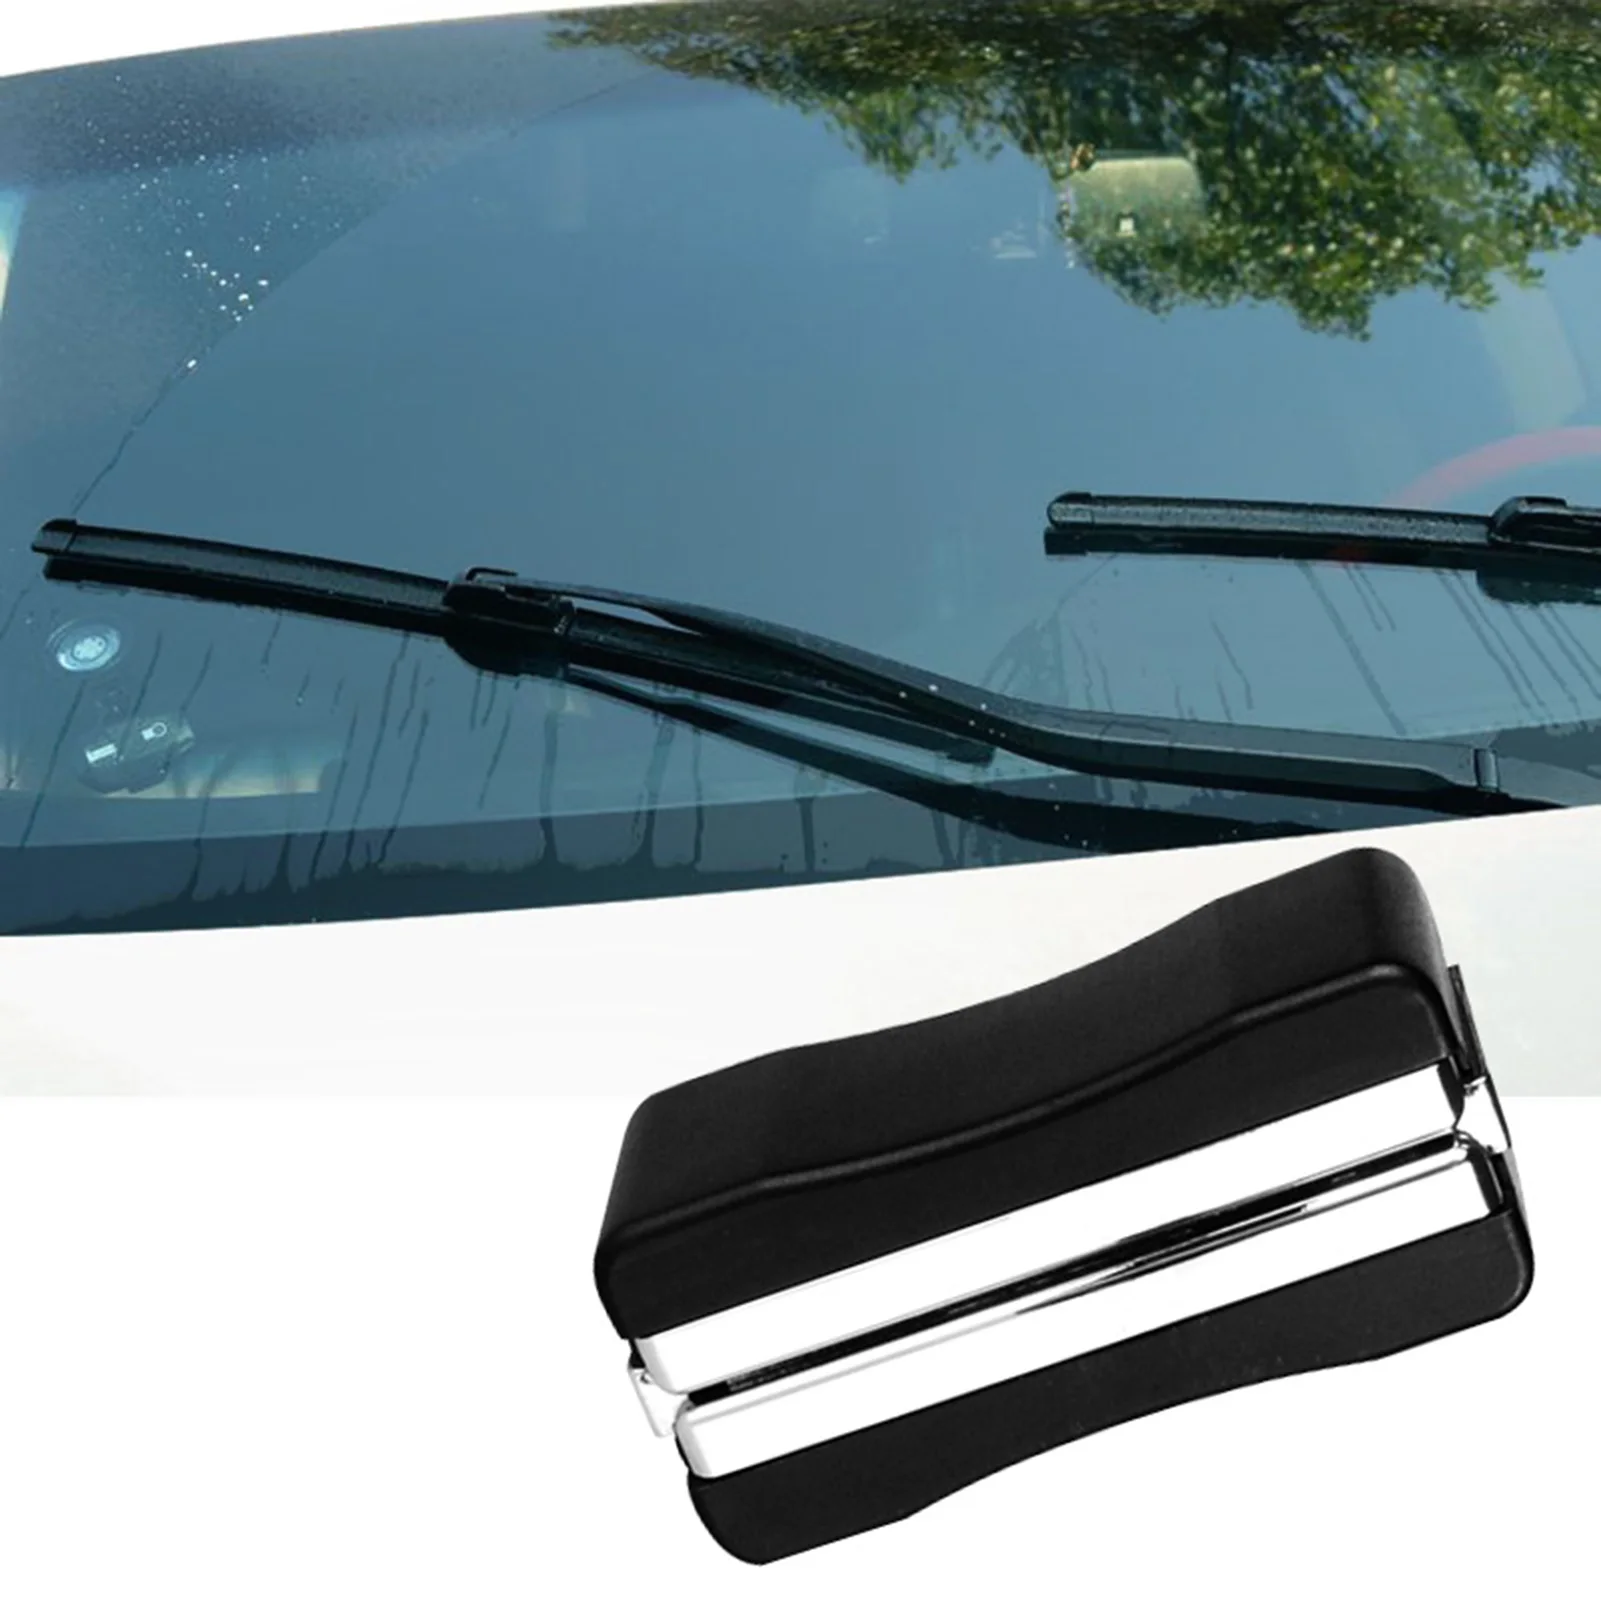 

Windshield Wiper Regroover Windscreen Wiper Blades Cutter Restorer Wiper Blades Repair Quickly And Easily Universal Trimmer Tool